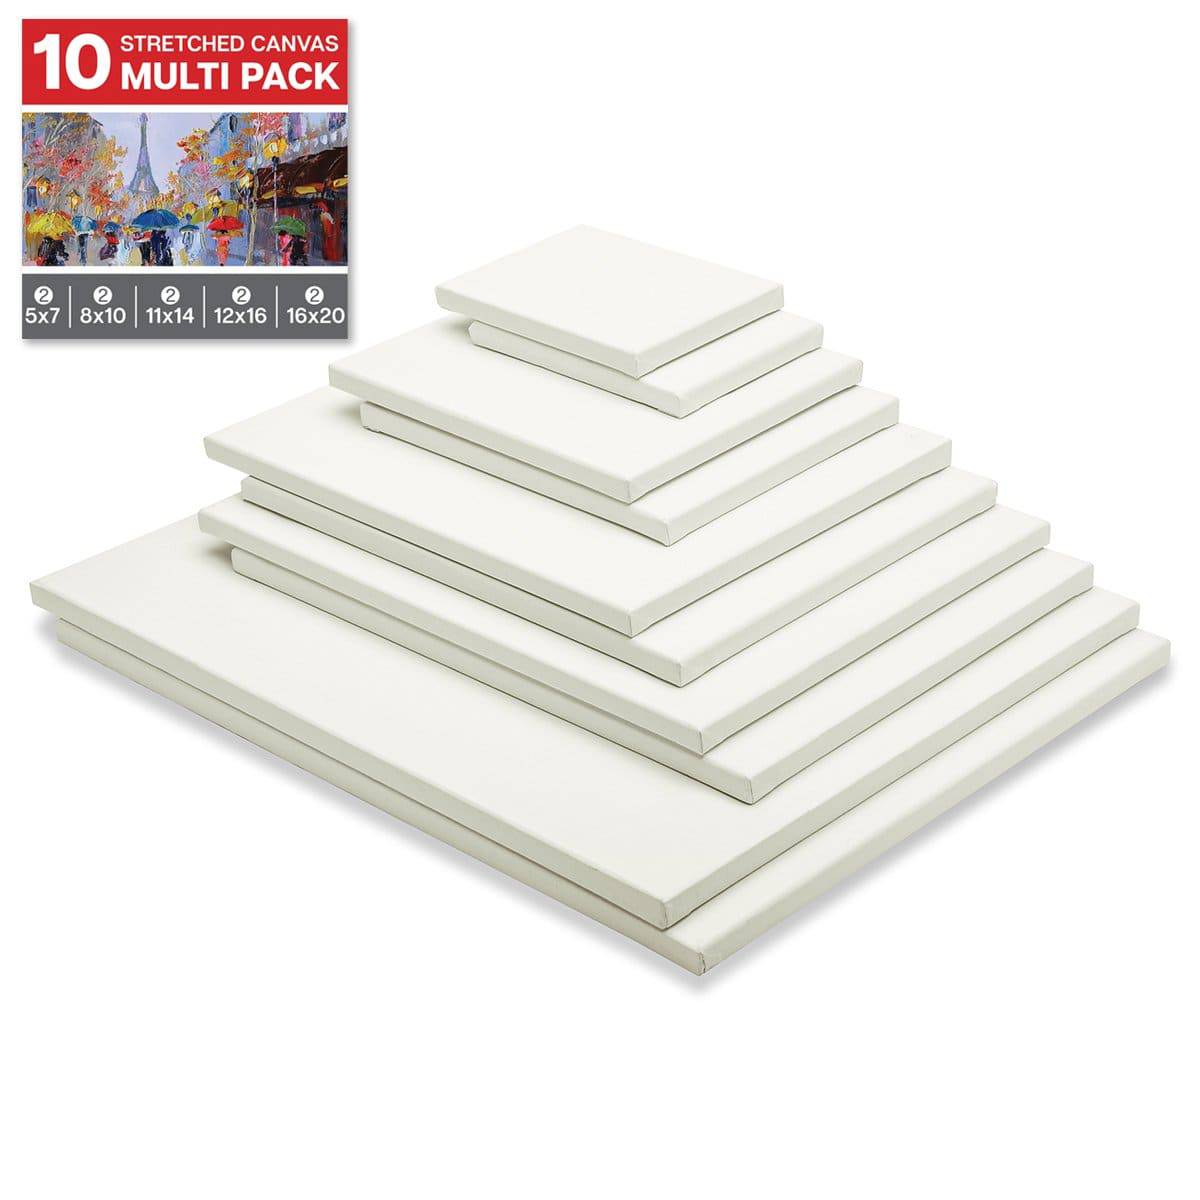 KINGART® Stretched White Canvas Multi-size pack, 10-Pack (2 ea